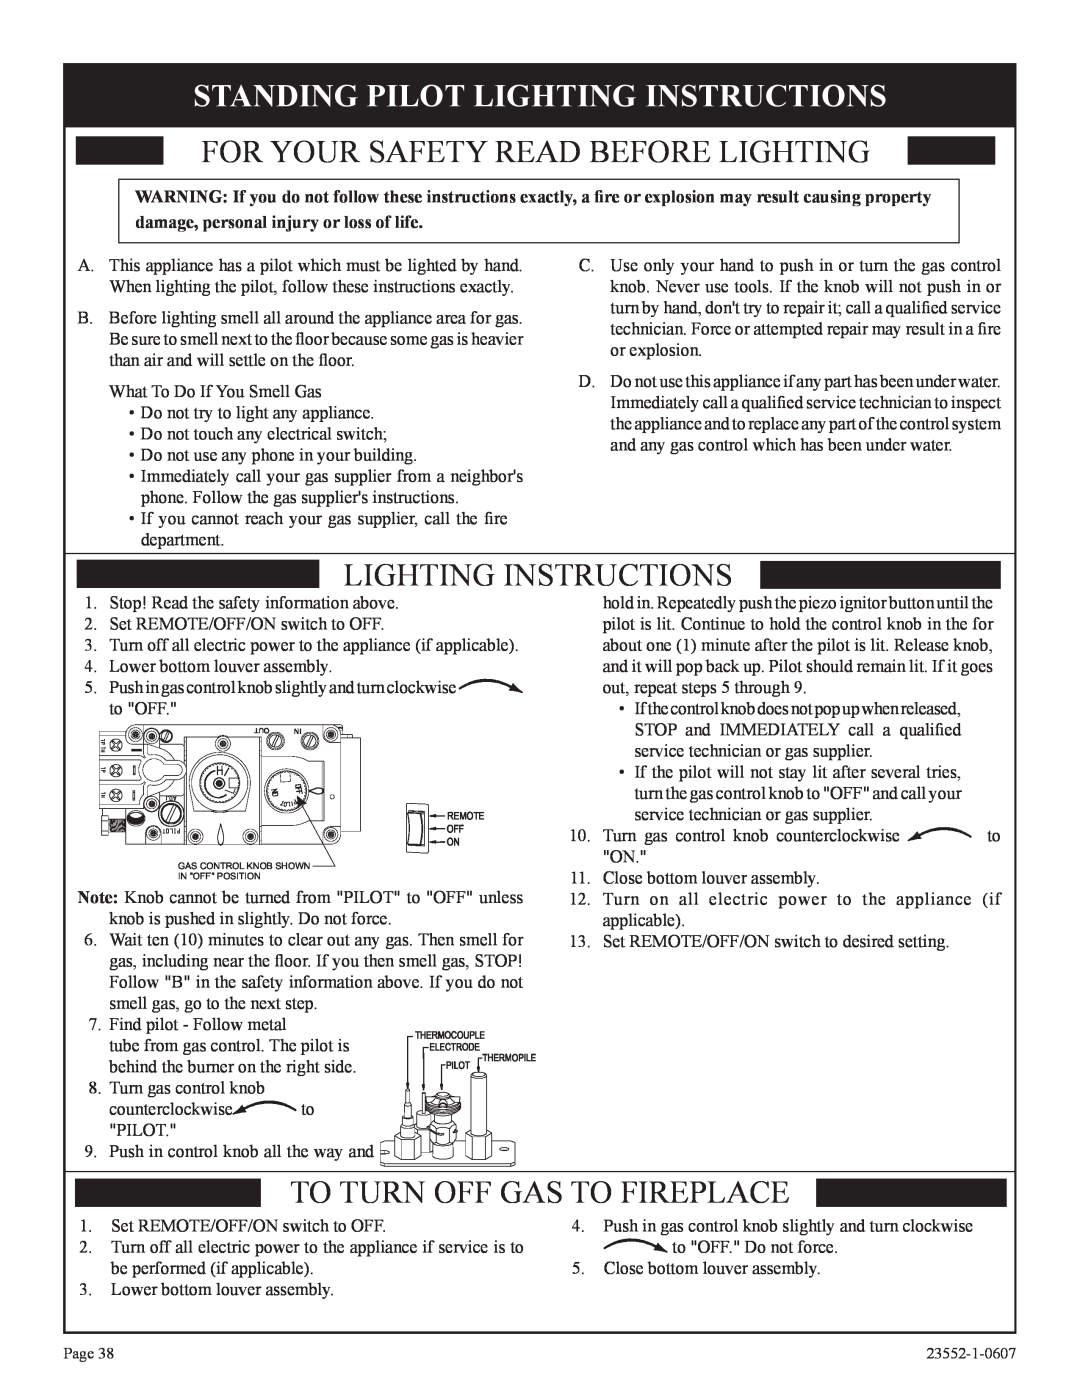 Empire Comfort Systems DVD48FP3, DVD42FP5 Standing Pilot Lighting Instructions, For Your Safety Read Before Lighting 